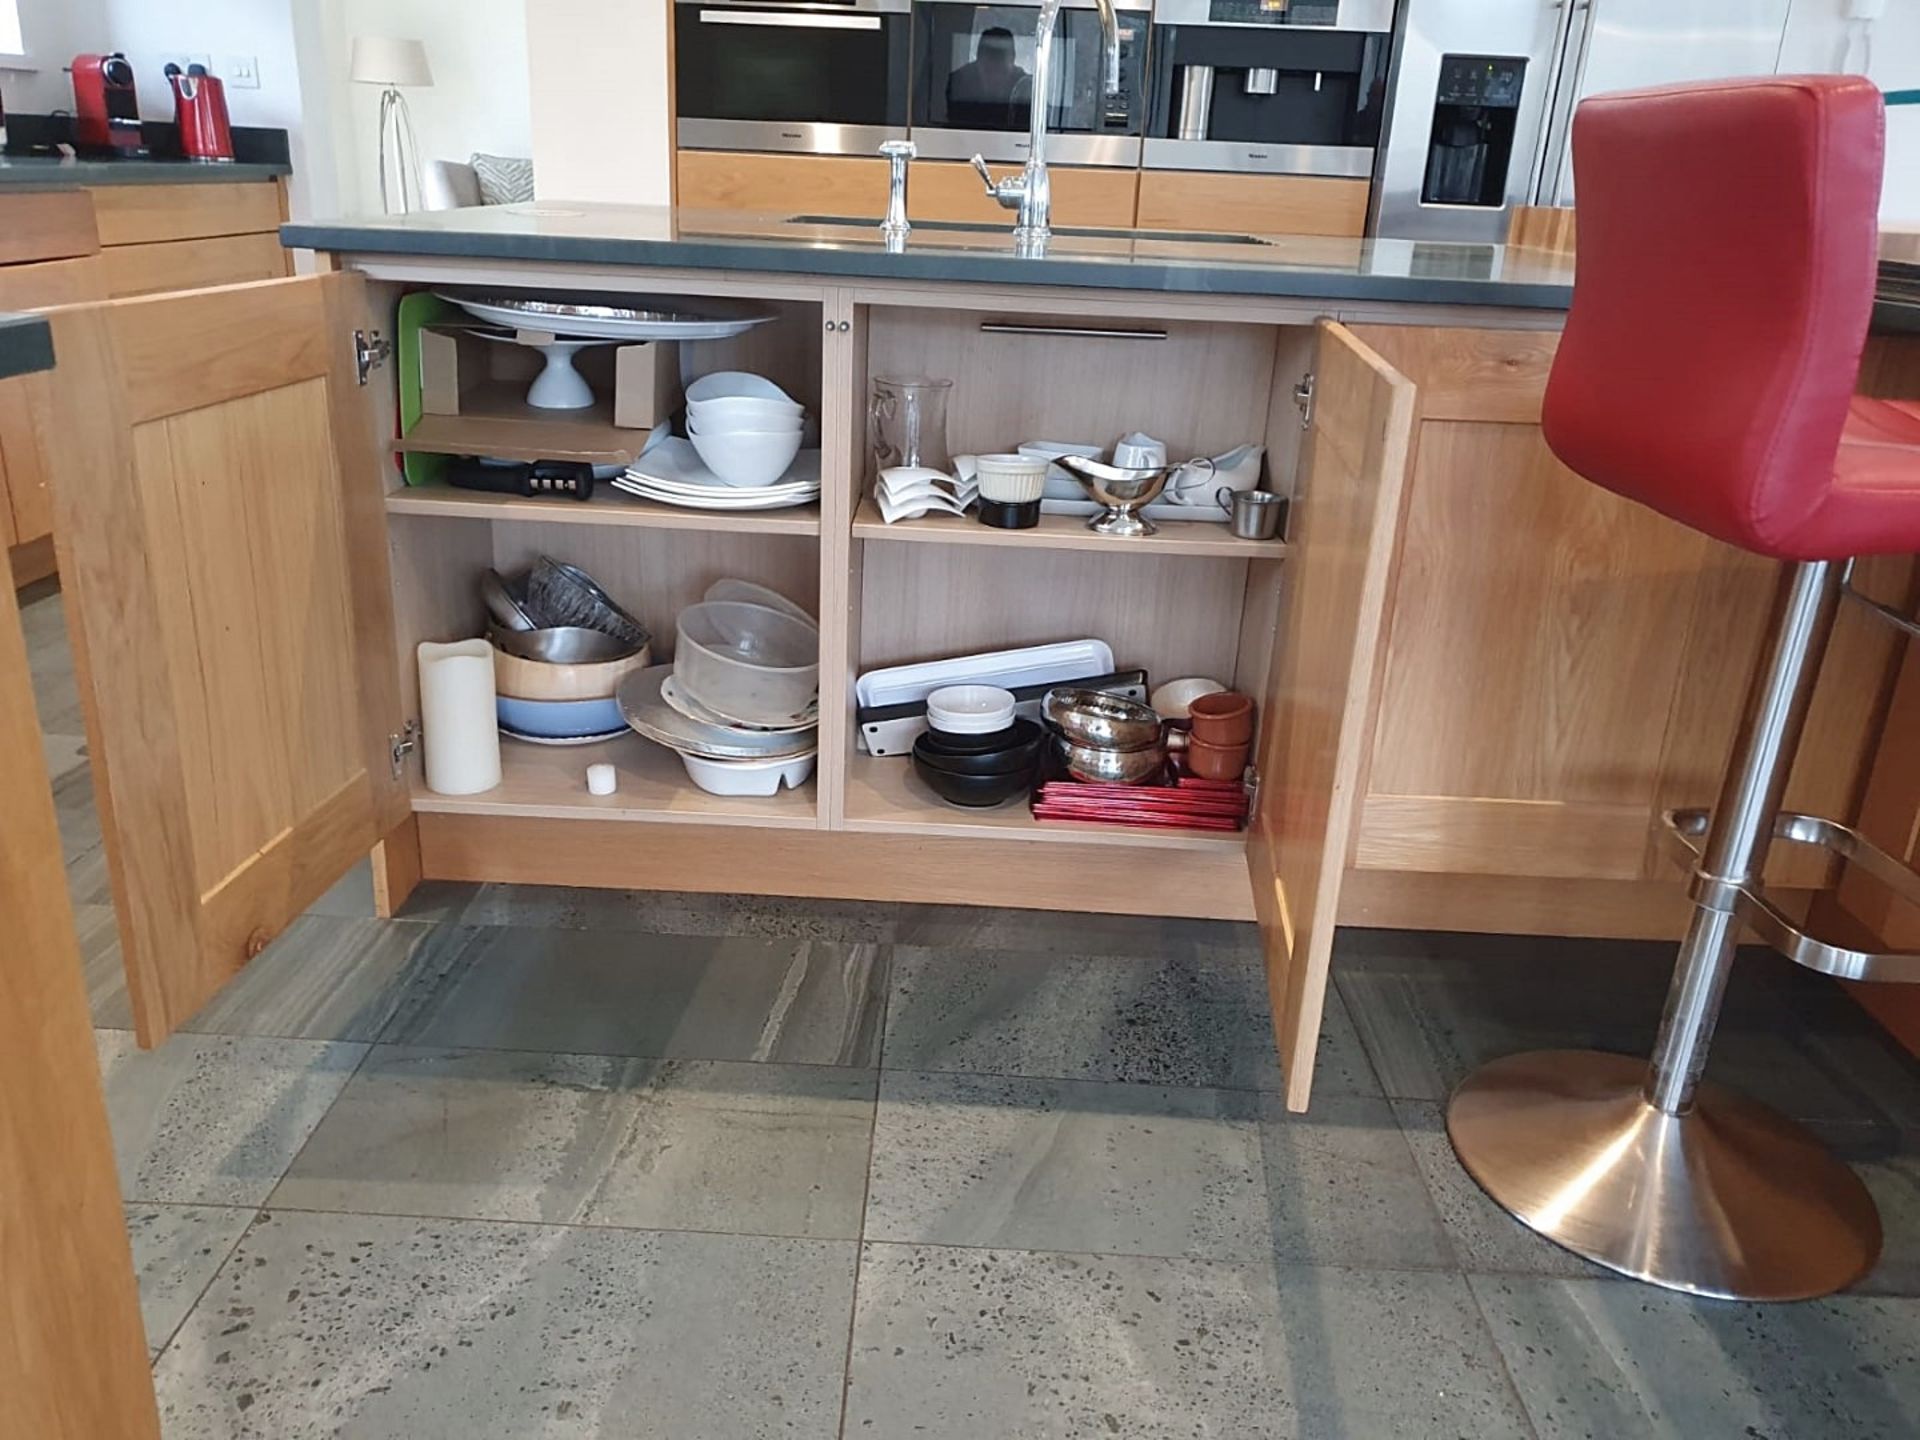 1 x Solid Oak Fitted Kitchen With Intergrated Miele Appliancess - CL487 - Location: Wigan *NO VAT* - Image 43 of 82